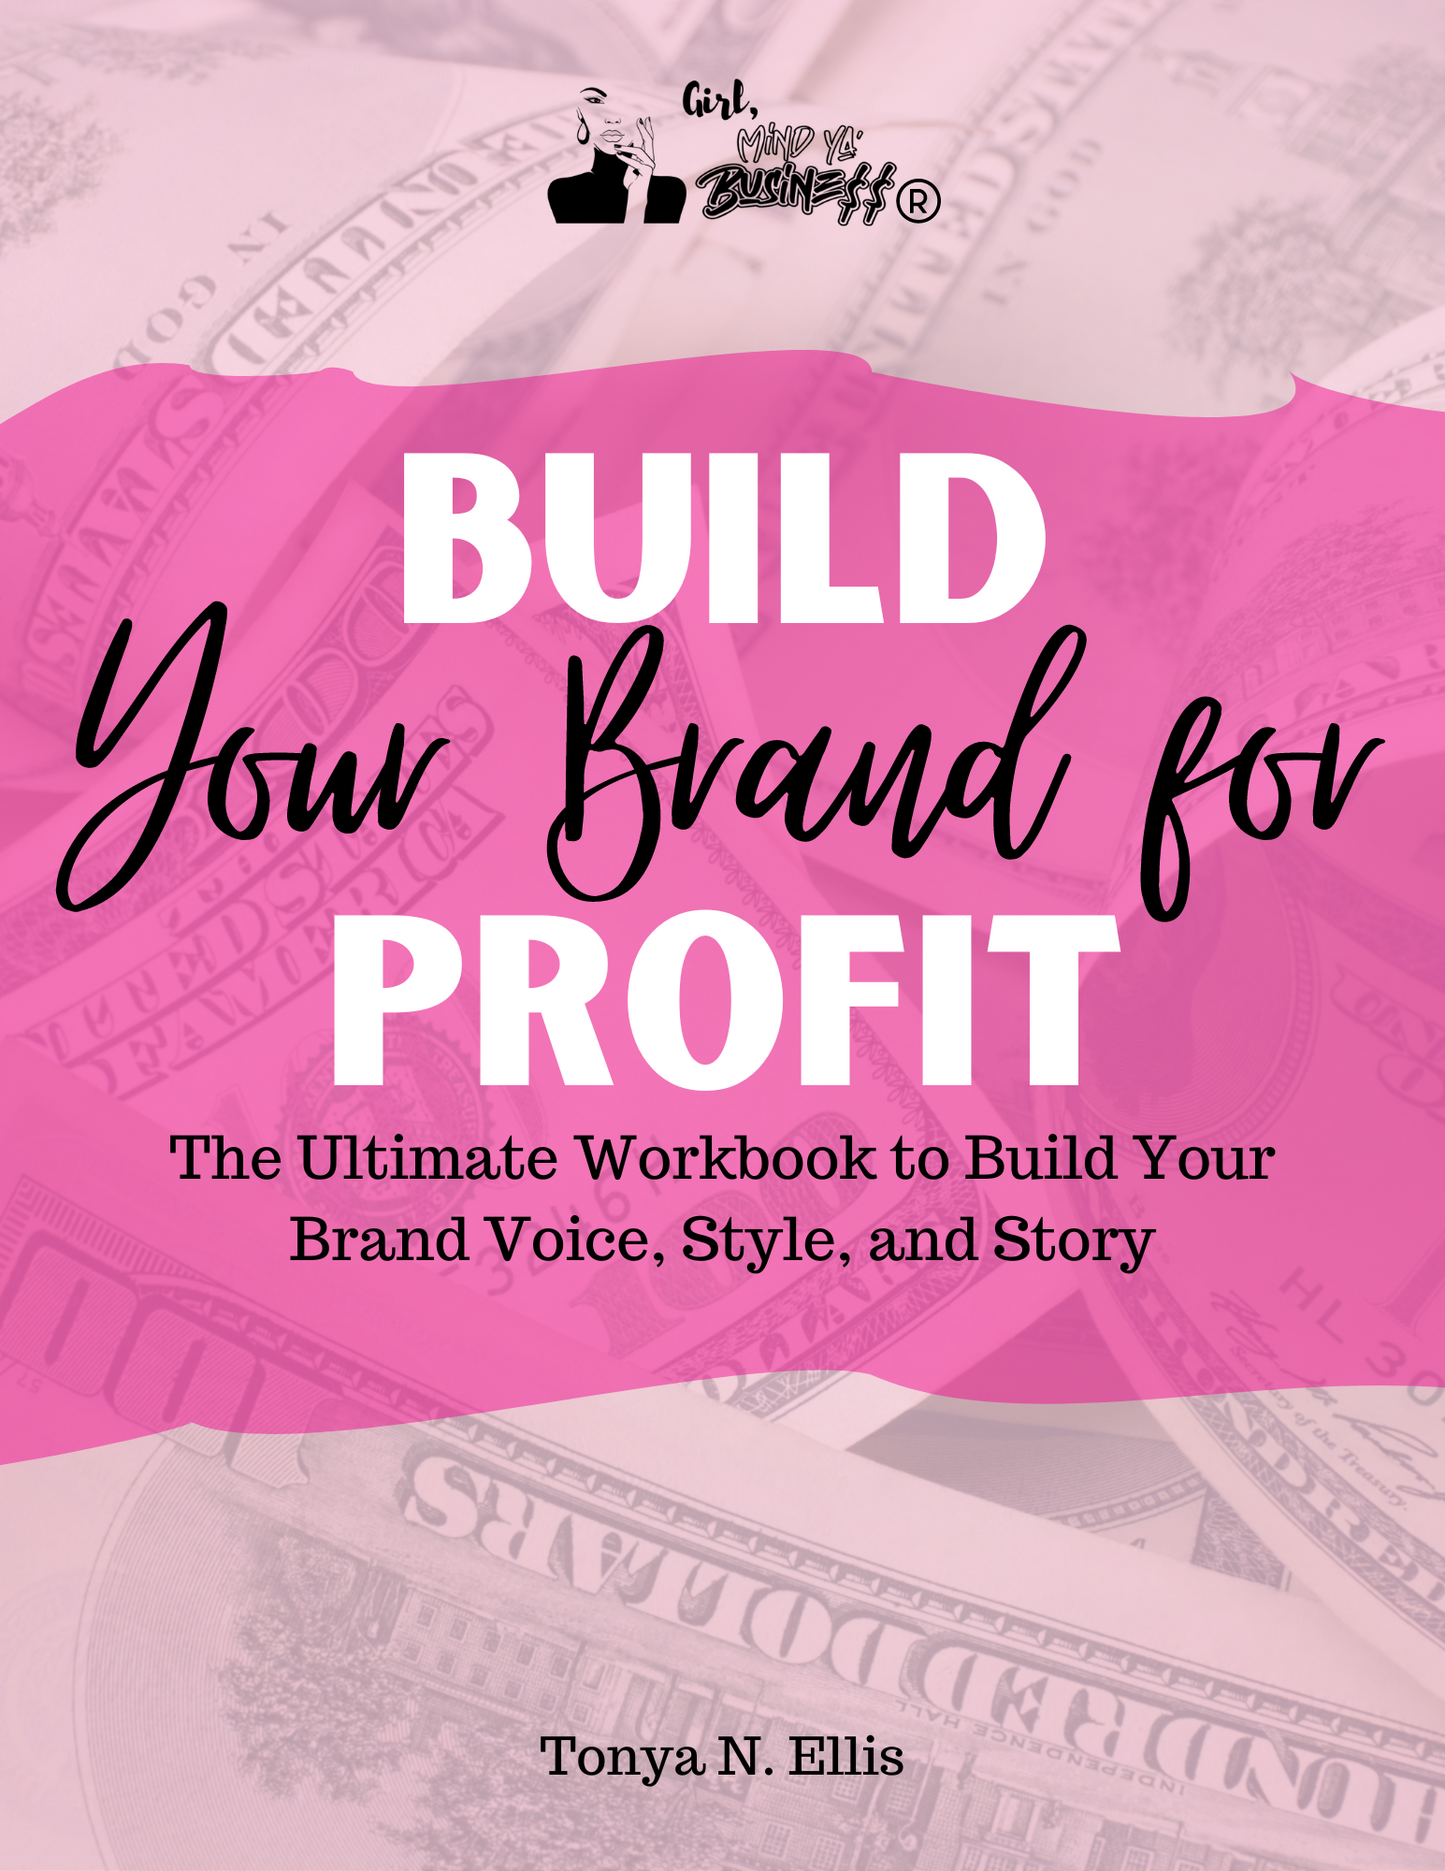 Build Your Brand for Profit (e-Book): The Ultimate Workbook to Build Your Brand Voice, Style, and Story